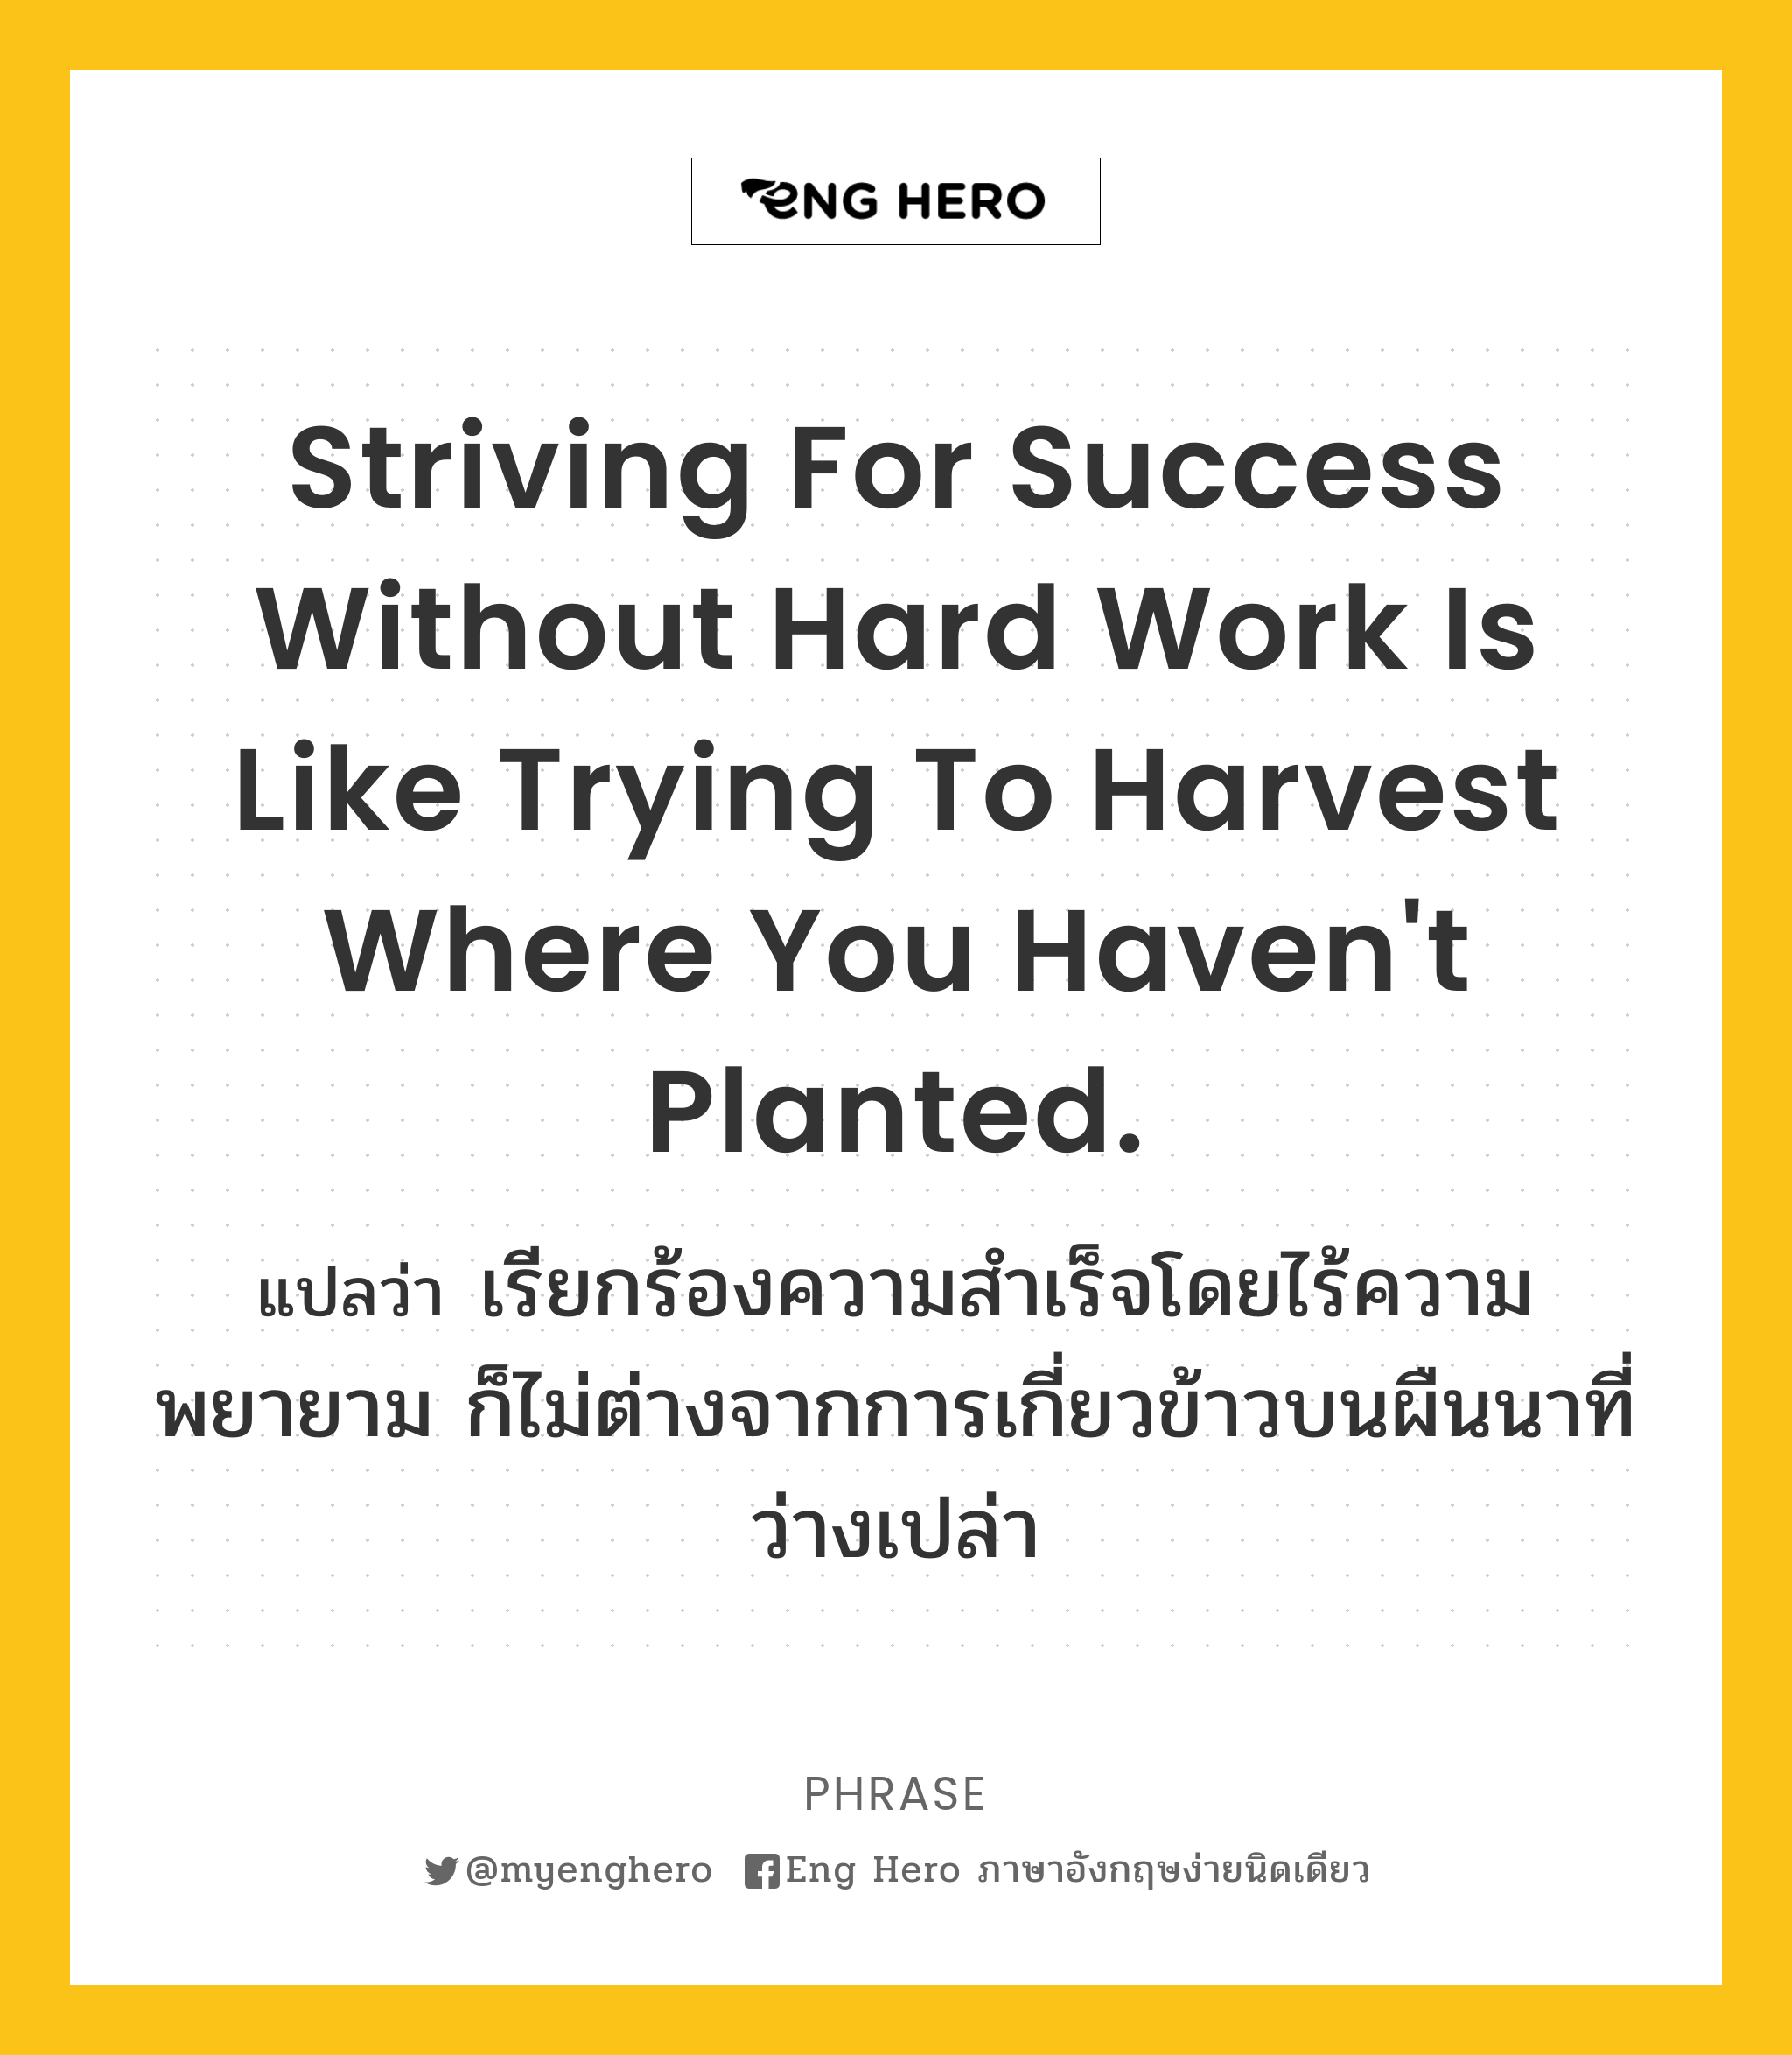 Striving for success without hard work is like trying to harvest where you haven't planted.